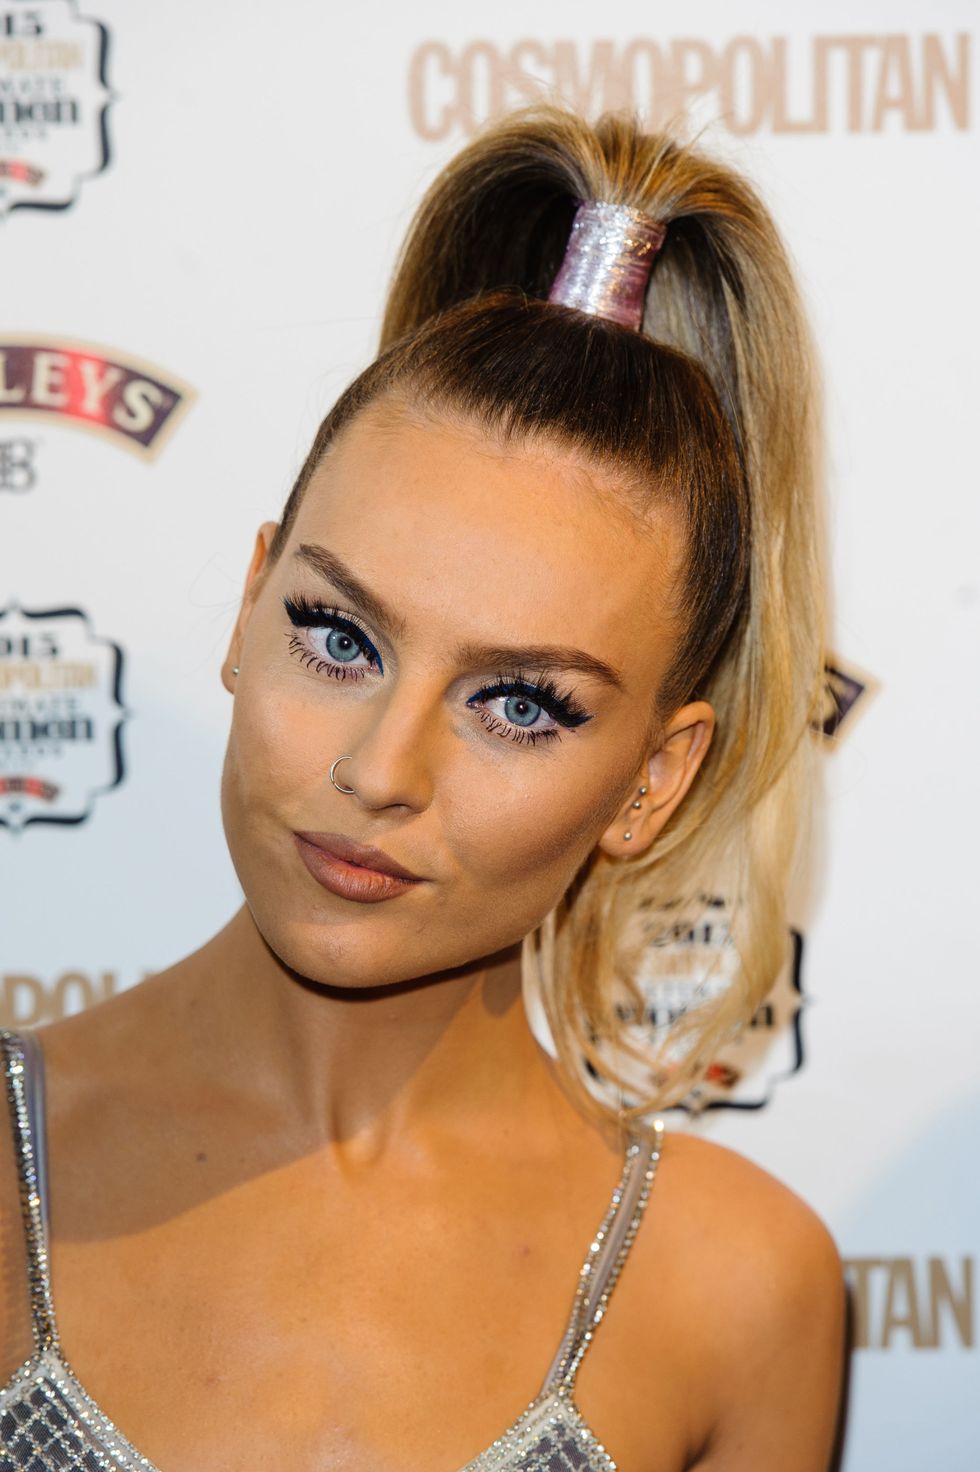 Perrie Edwards -Cosmopolitan's Ultimate Women of the Year Awards 2015: The glam